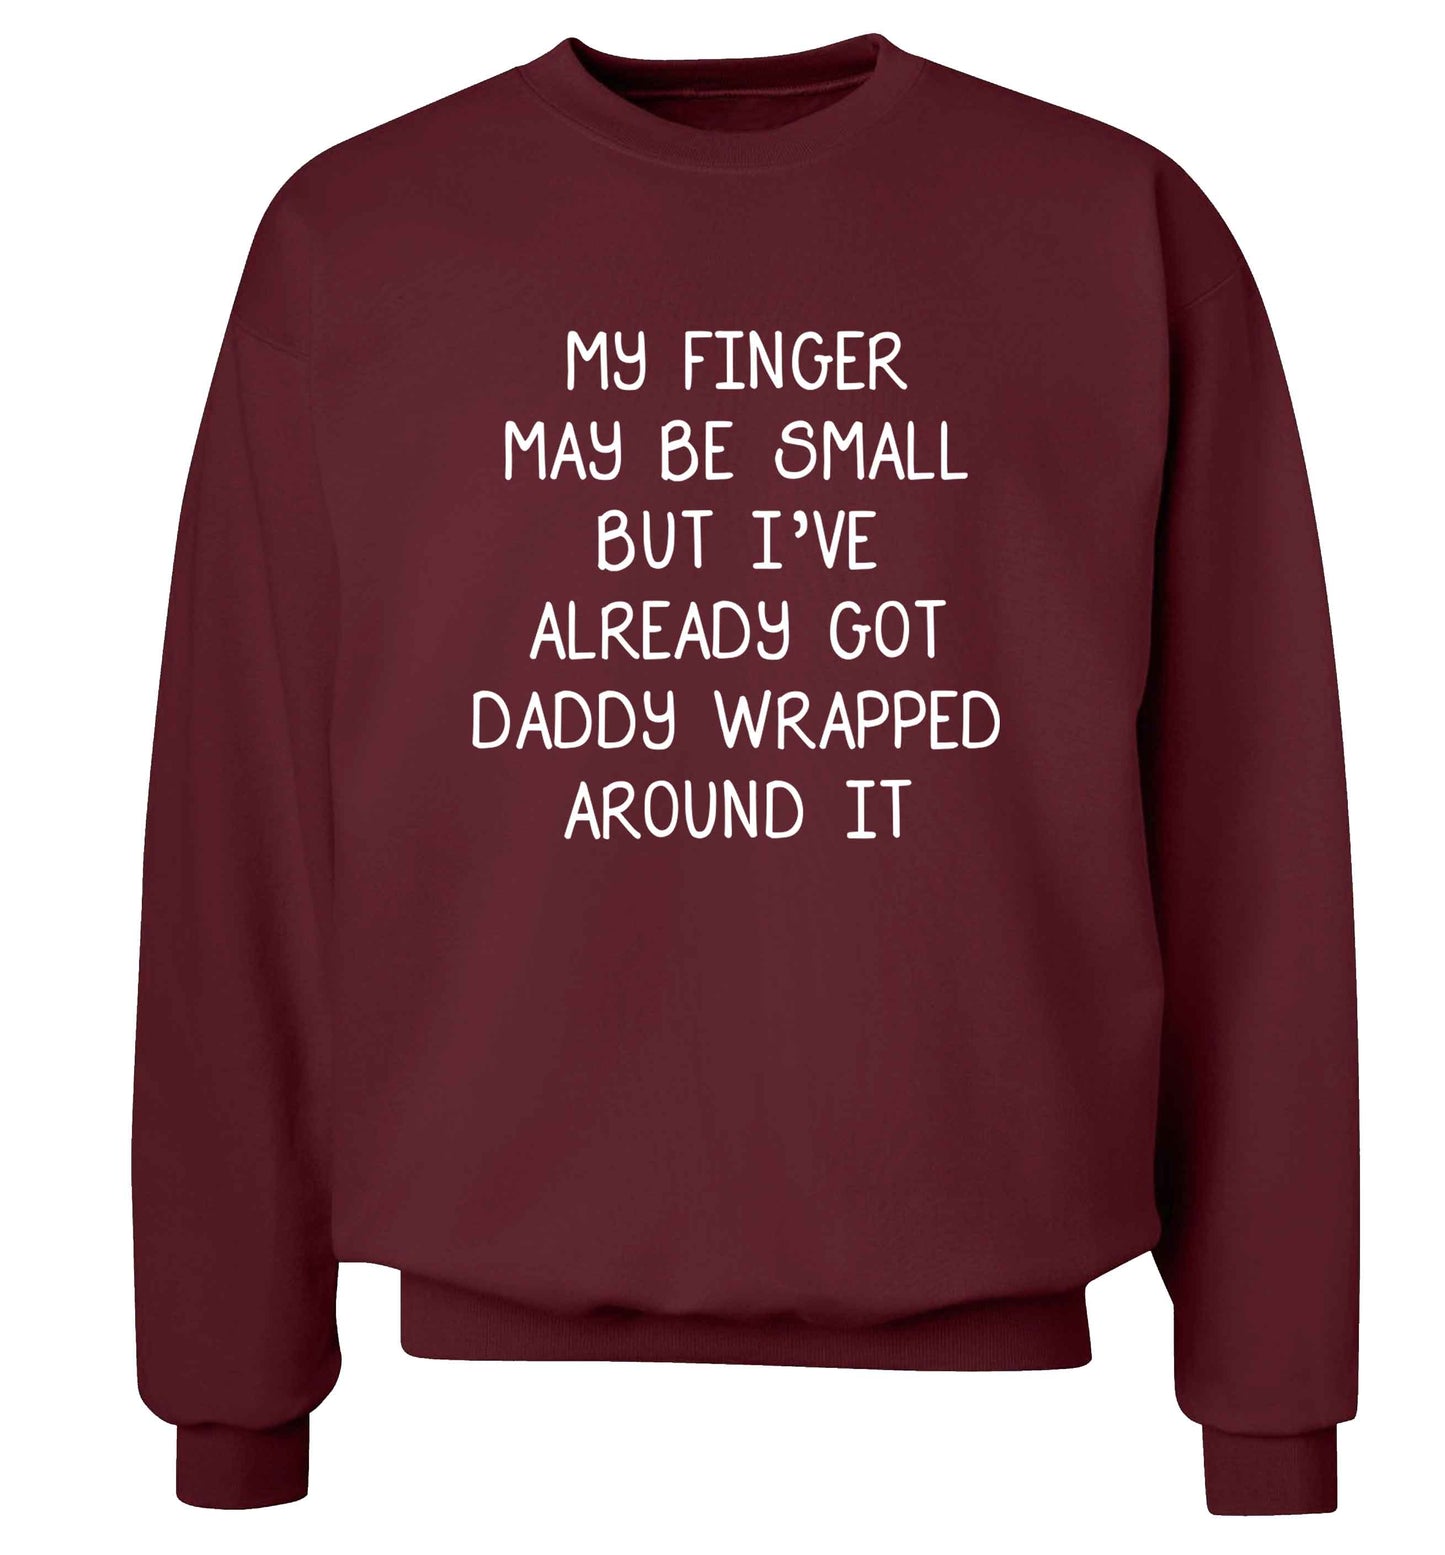 My finger may be small but I've already got daddy wrapped around it adult's unisex maroon sweater 2XL